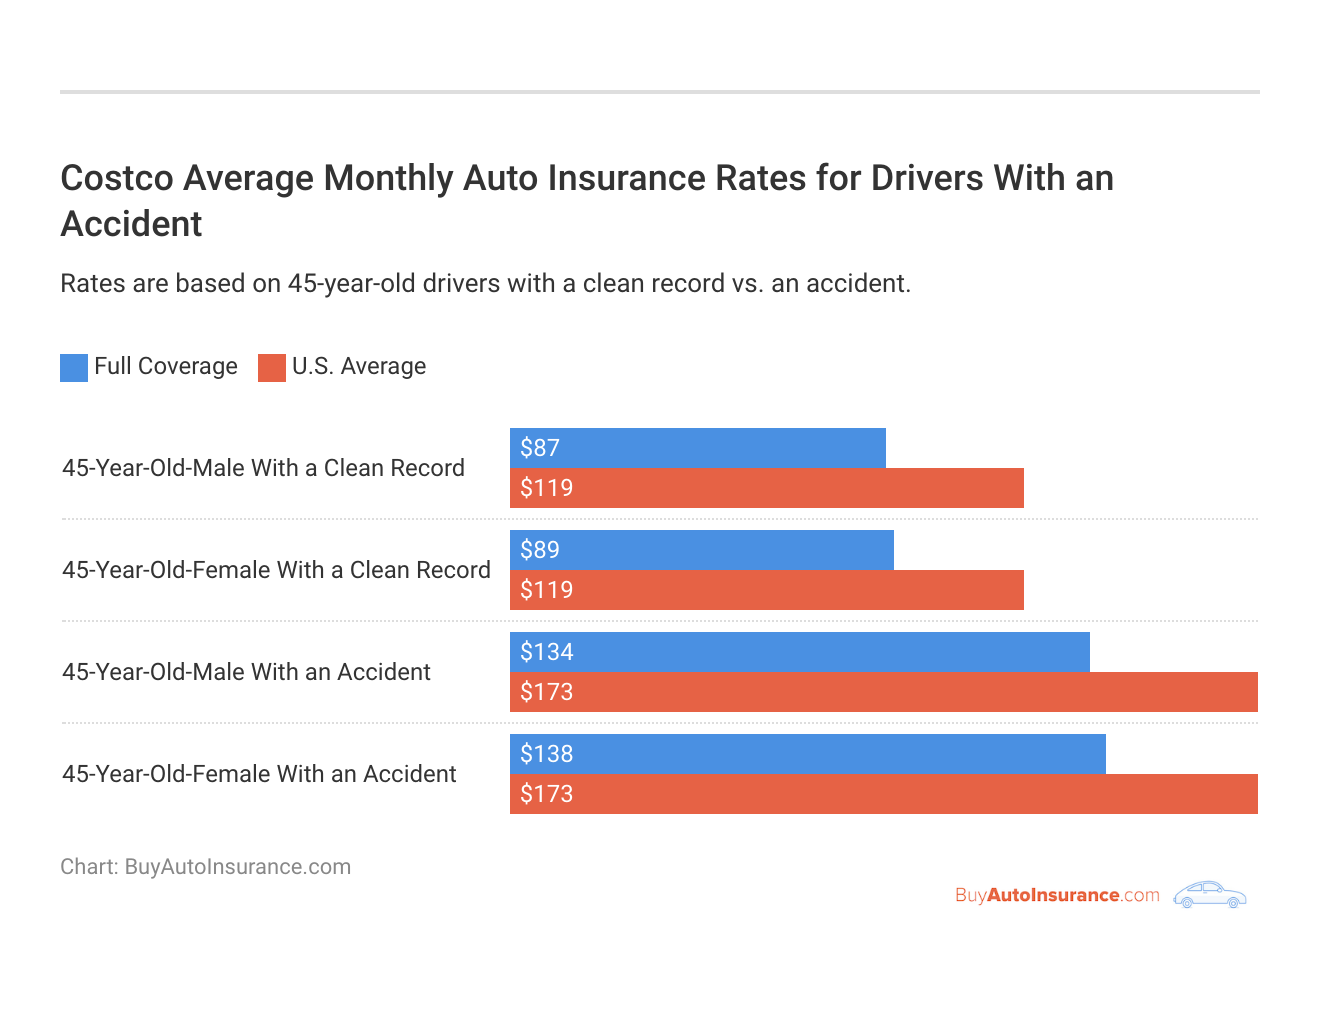 <h3>Costco Average Monthly Auto Insurance Rates for Drivers With an Accident</h3>